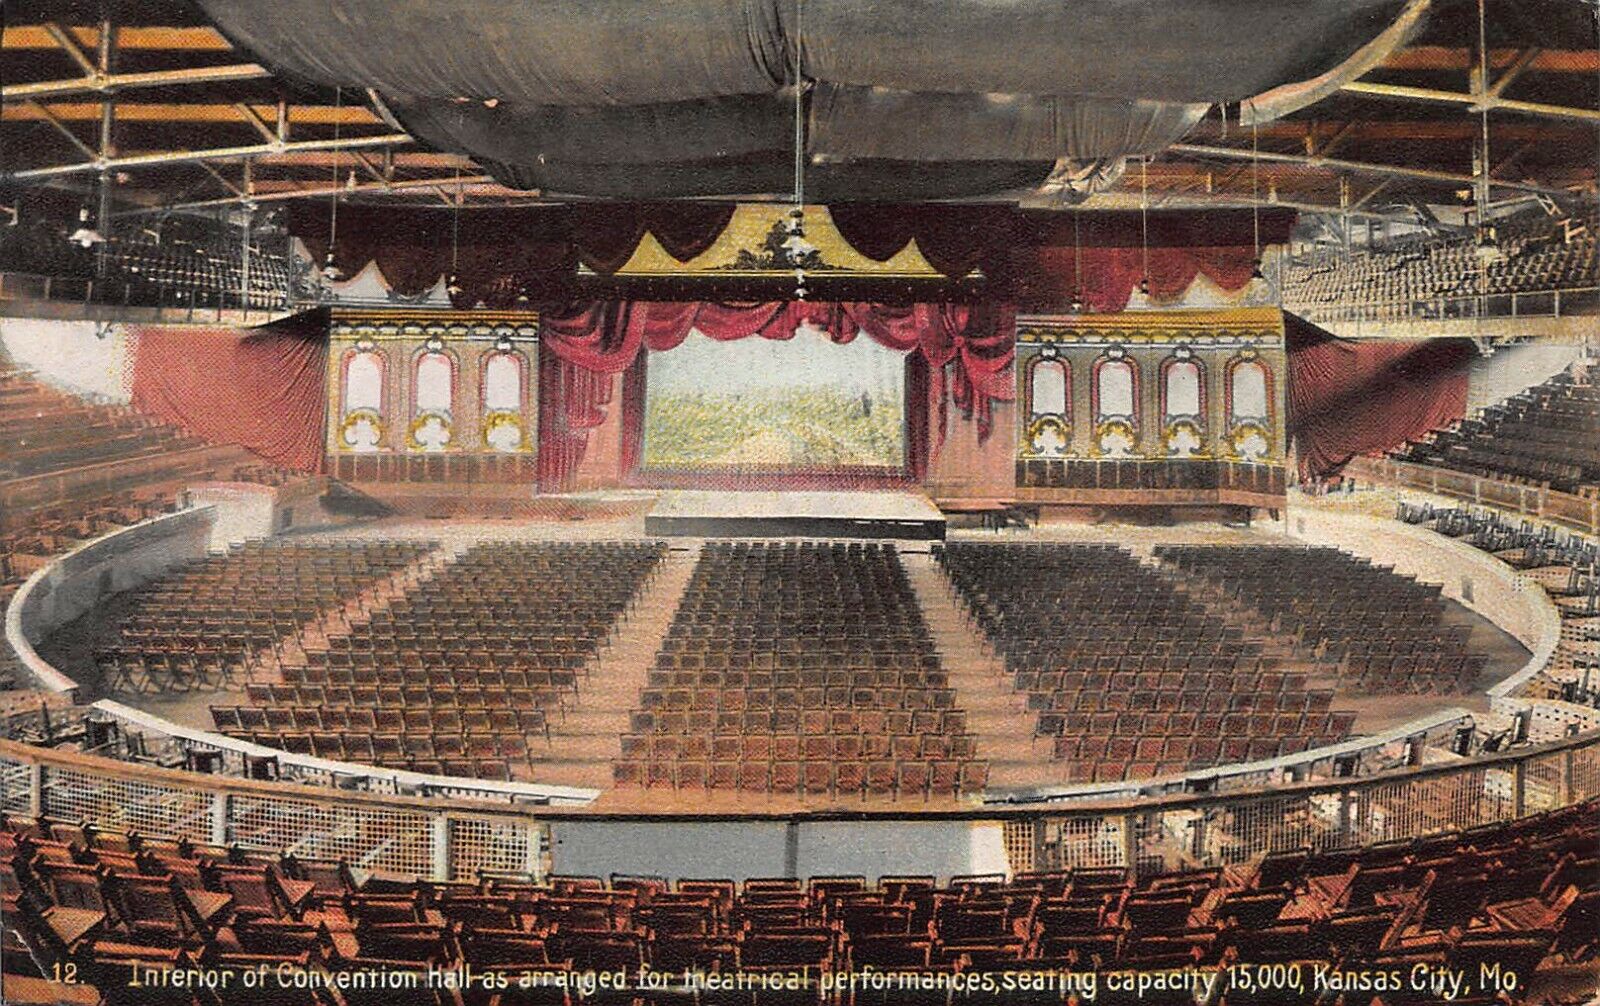 Interior of Convention Hall, Kansas City, Missouri, early postcard, used in 1908